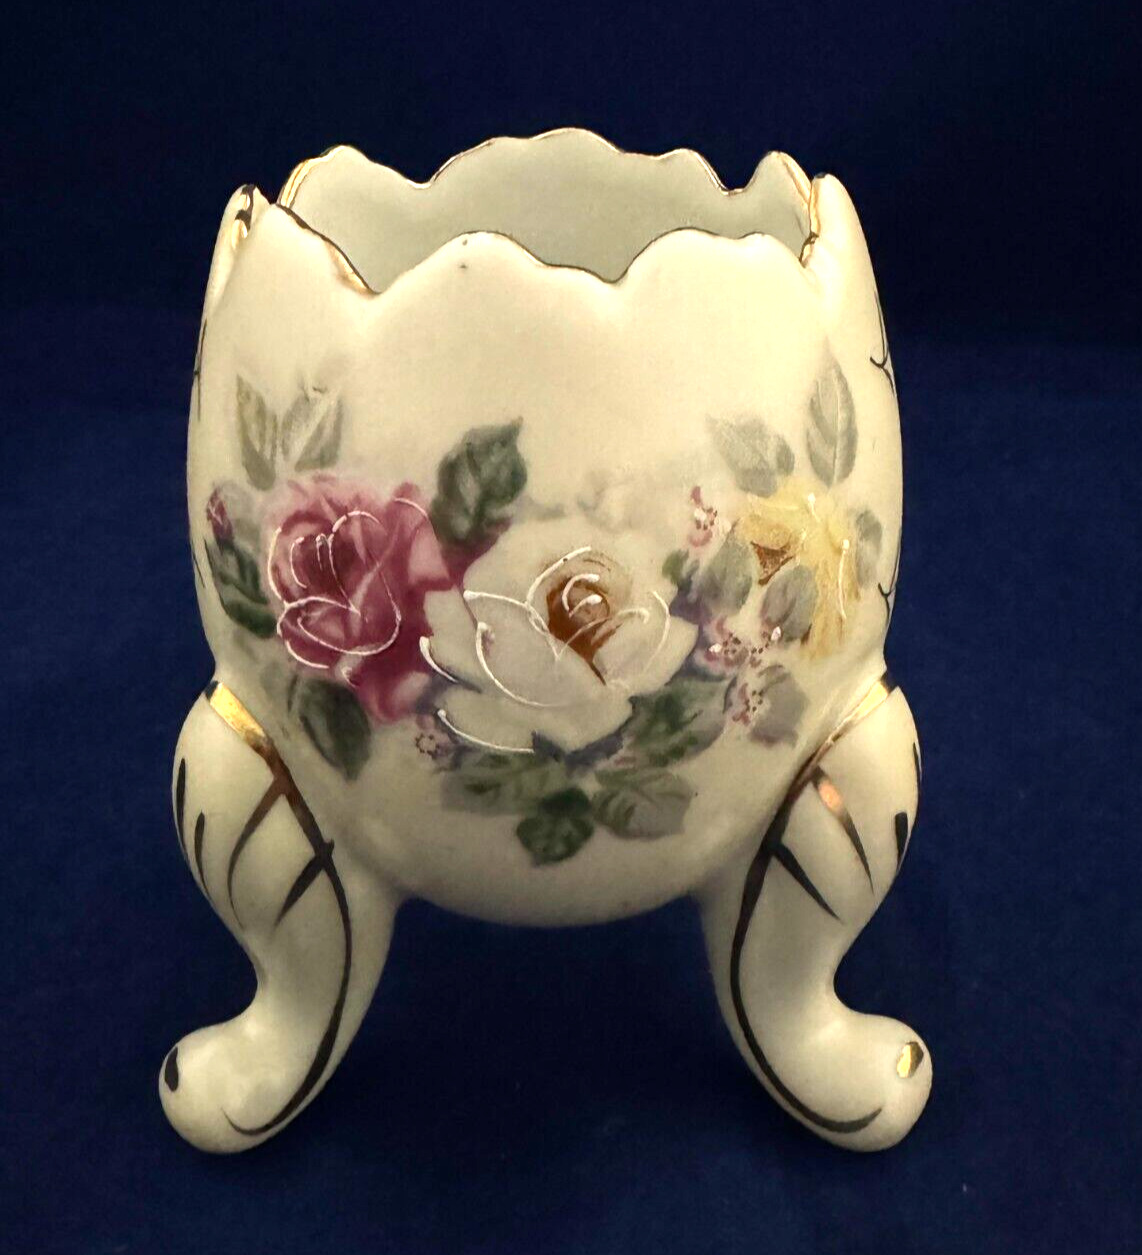 Inarco  Footed Cracked Egg Vase Pink & White Roses creme background numbered